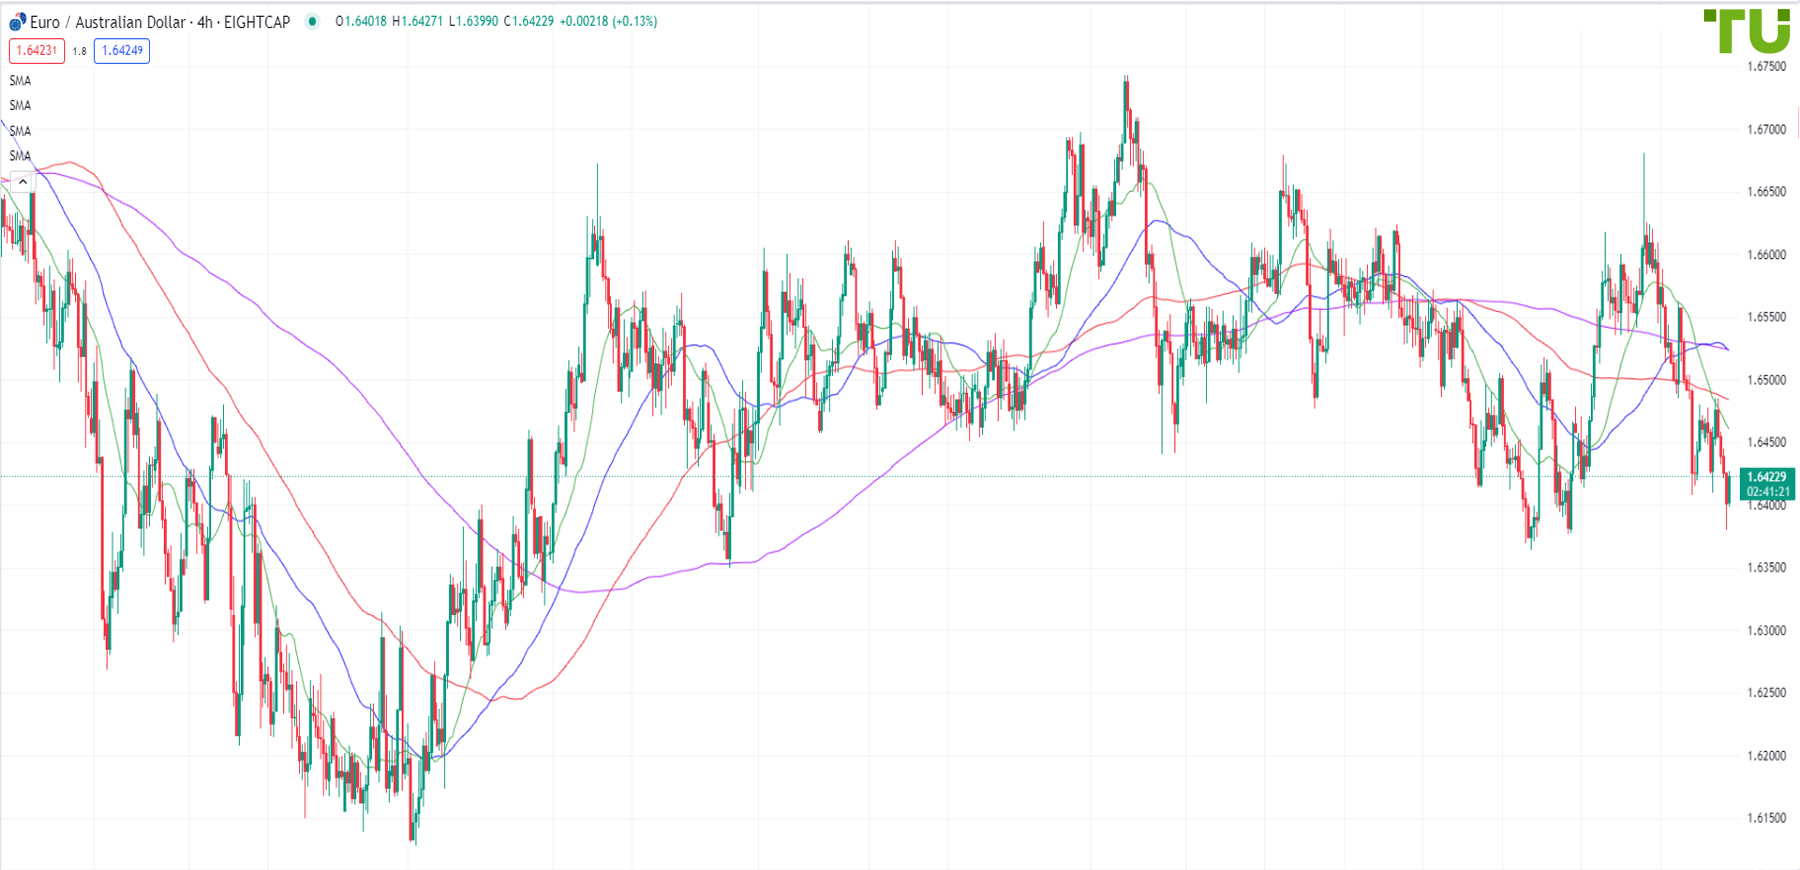 EUR/AUD tested 1.6380 strong support